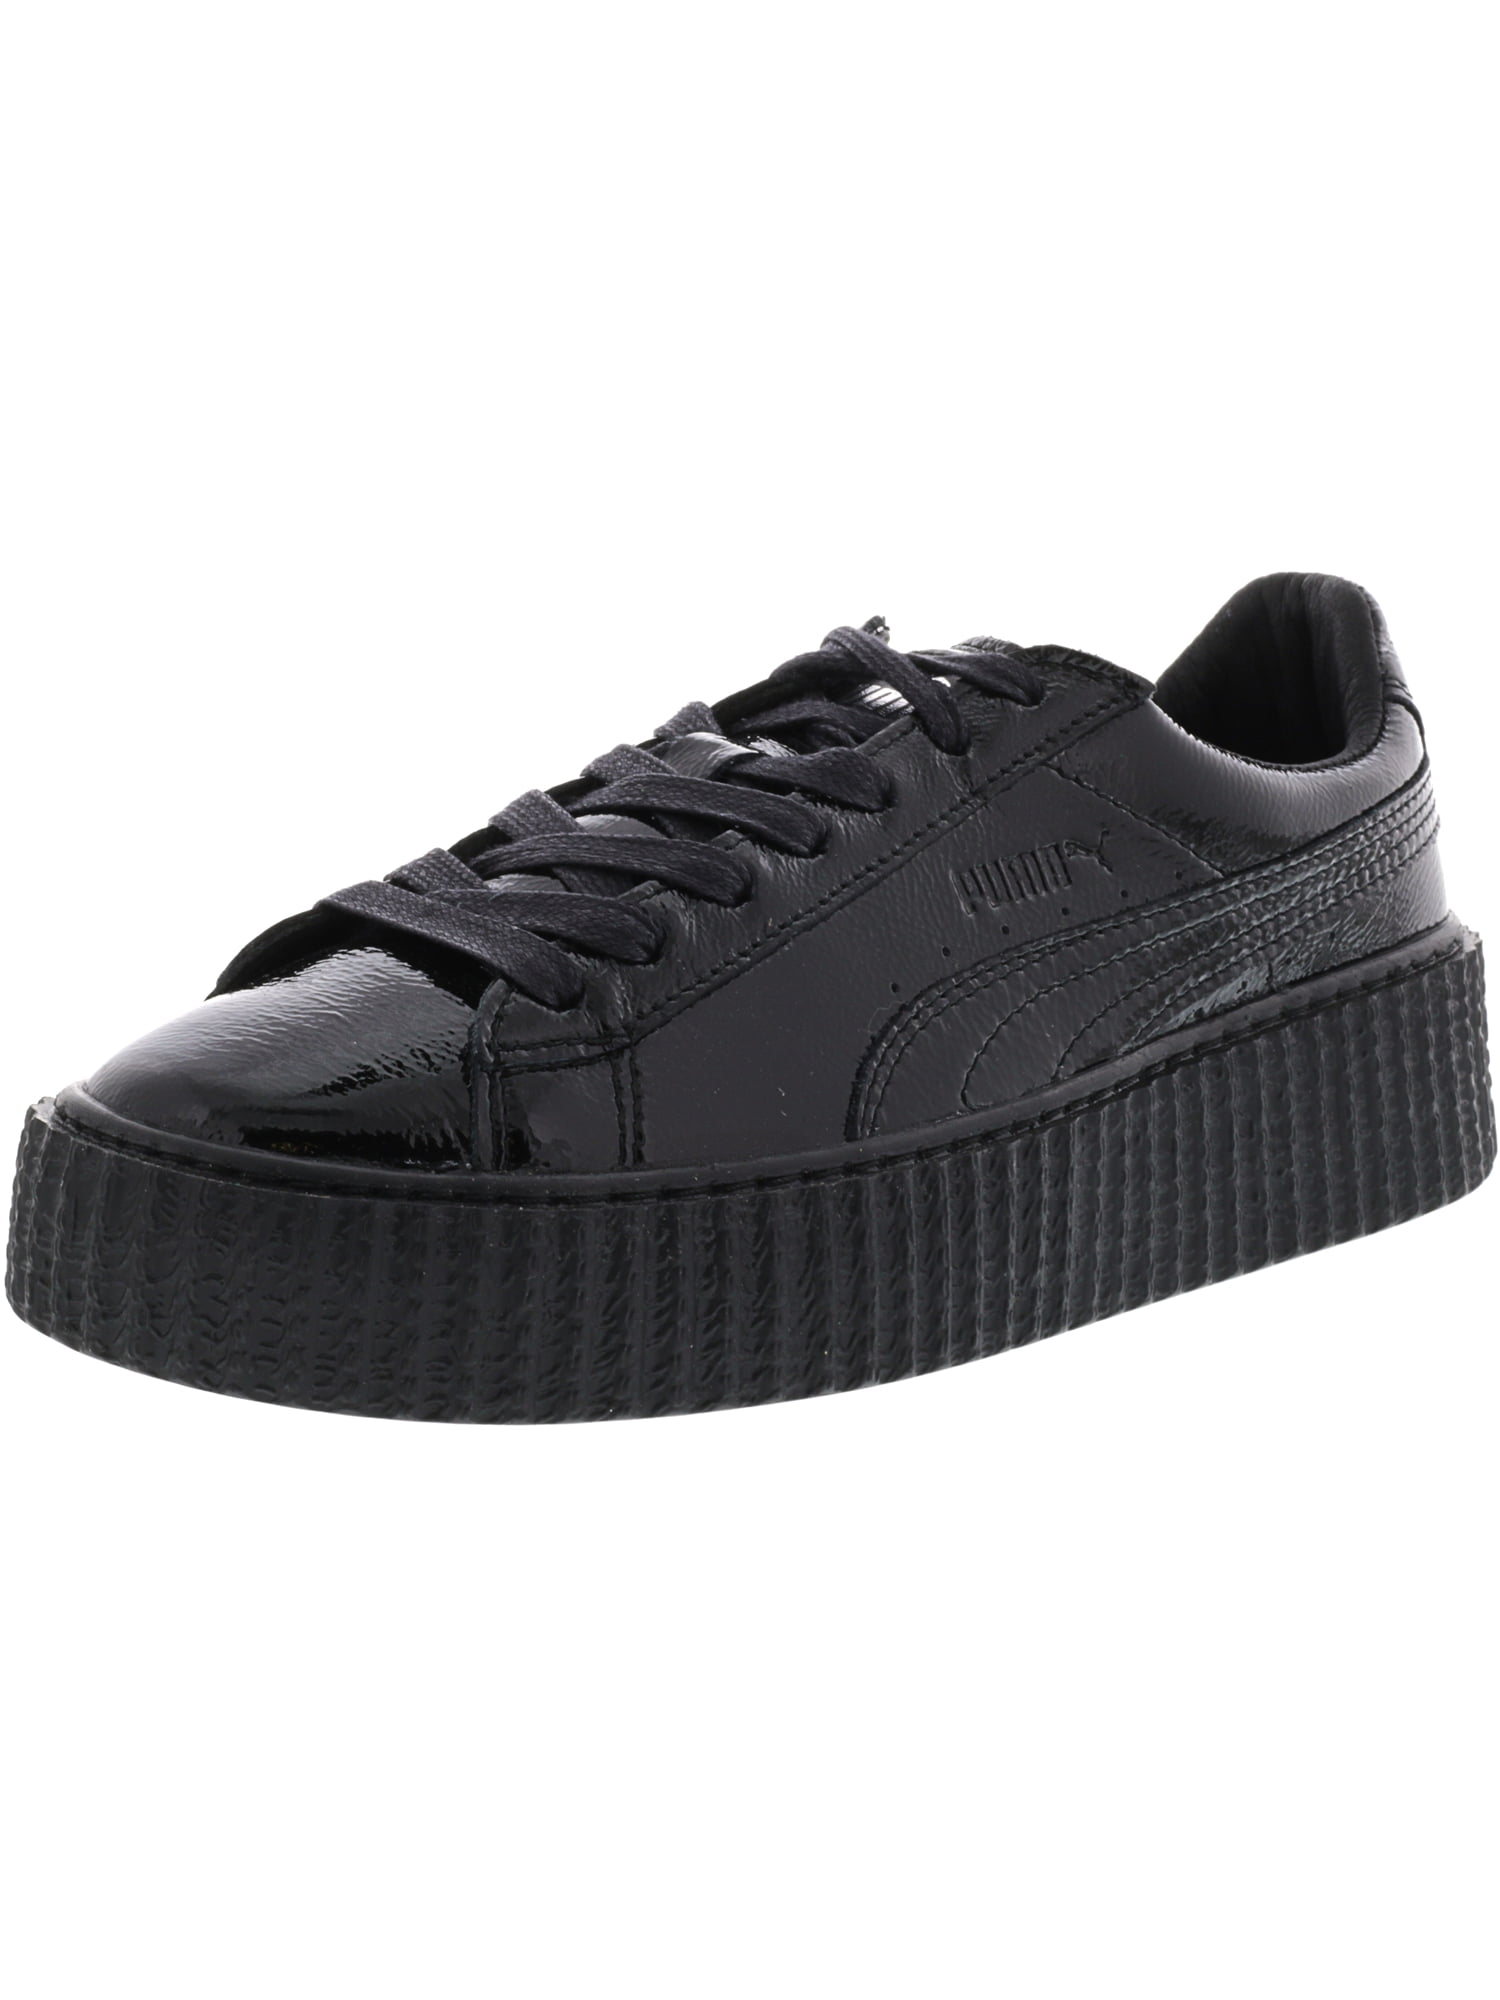 Puma Women's Creeper Wrinkled Patent Black / Ankle-High Leather Fashion ...